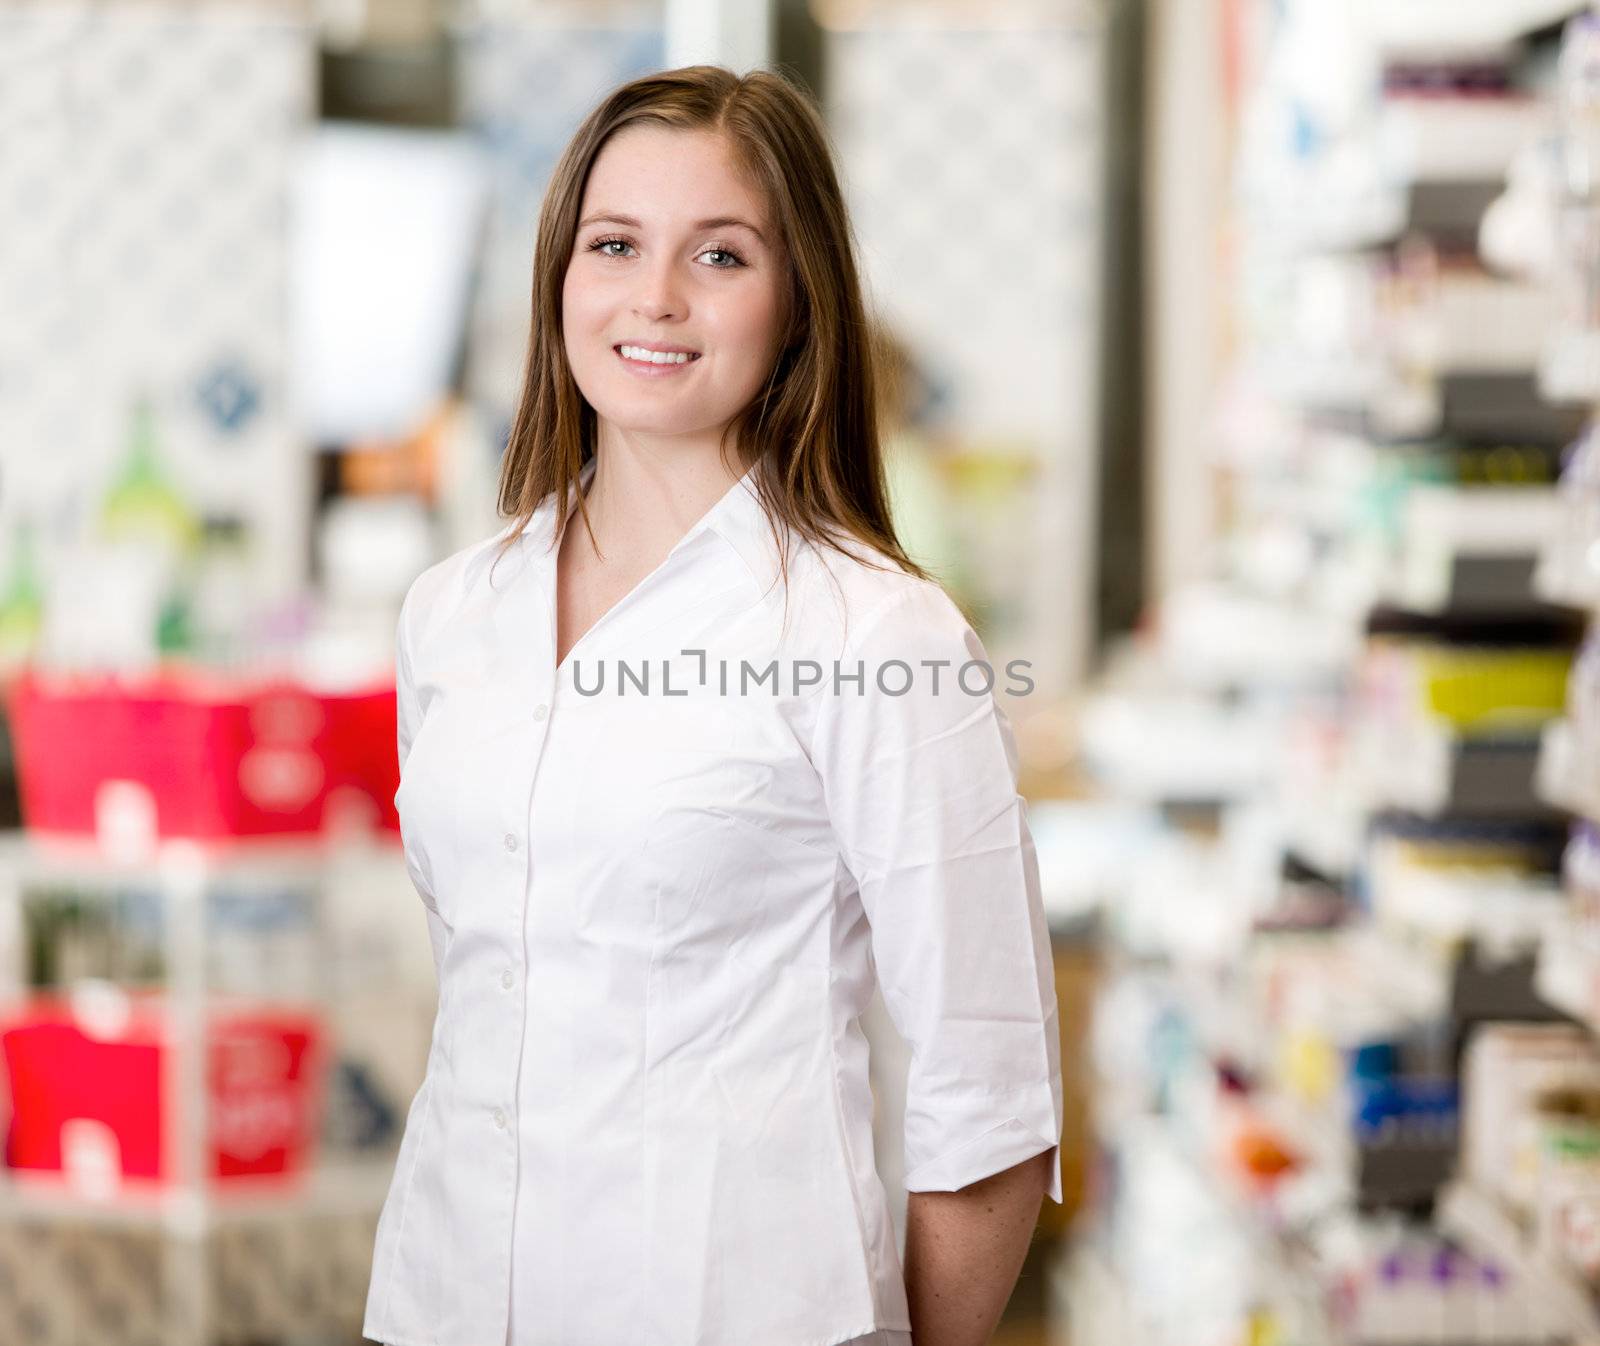 Portrait of a young attractive pharmacist standing in a pharmacy interior looking at the camera